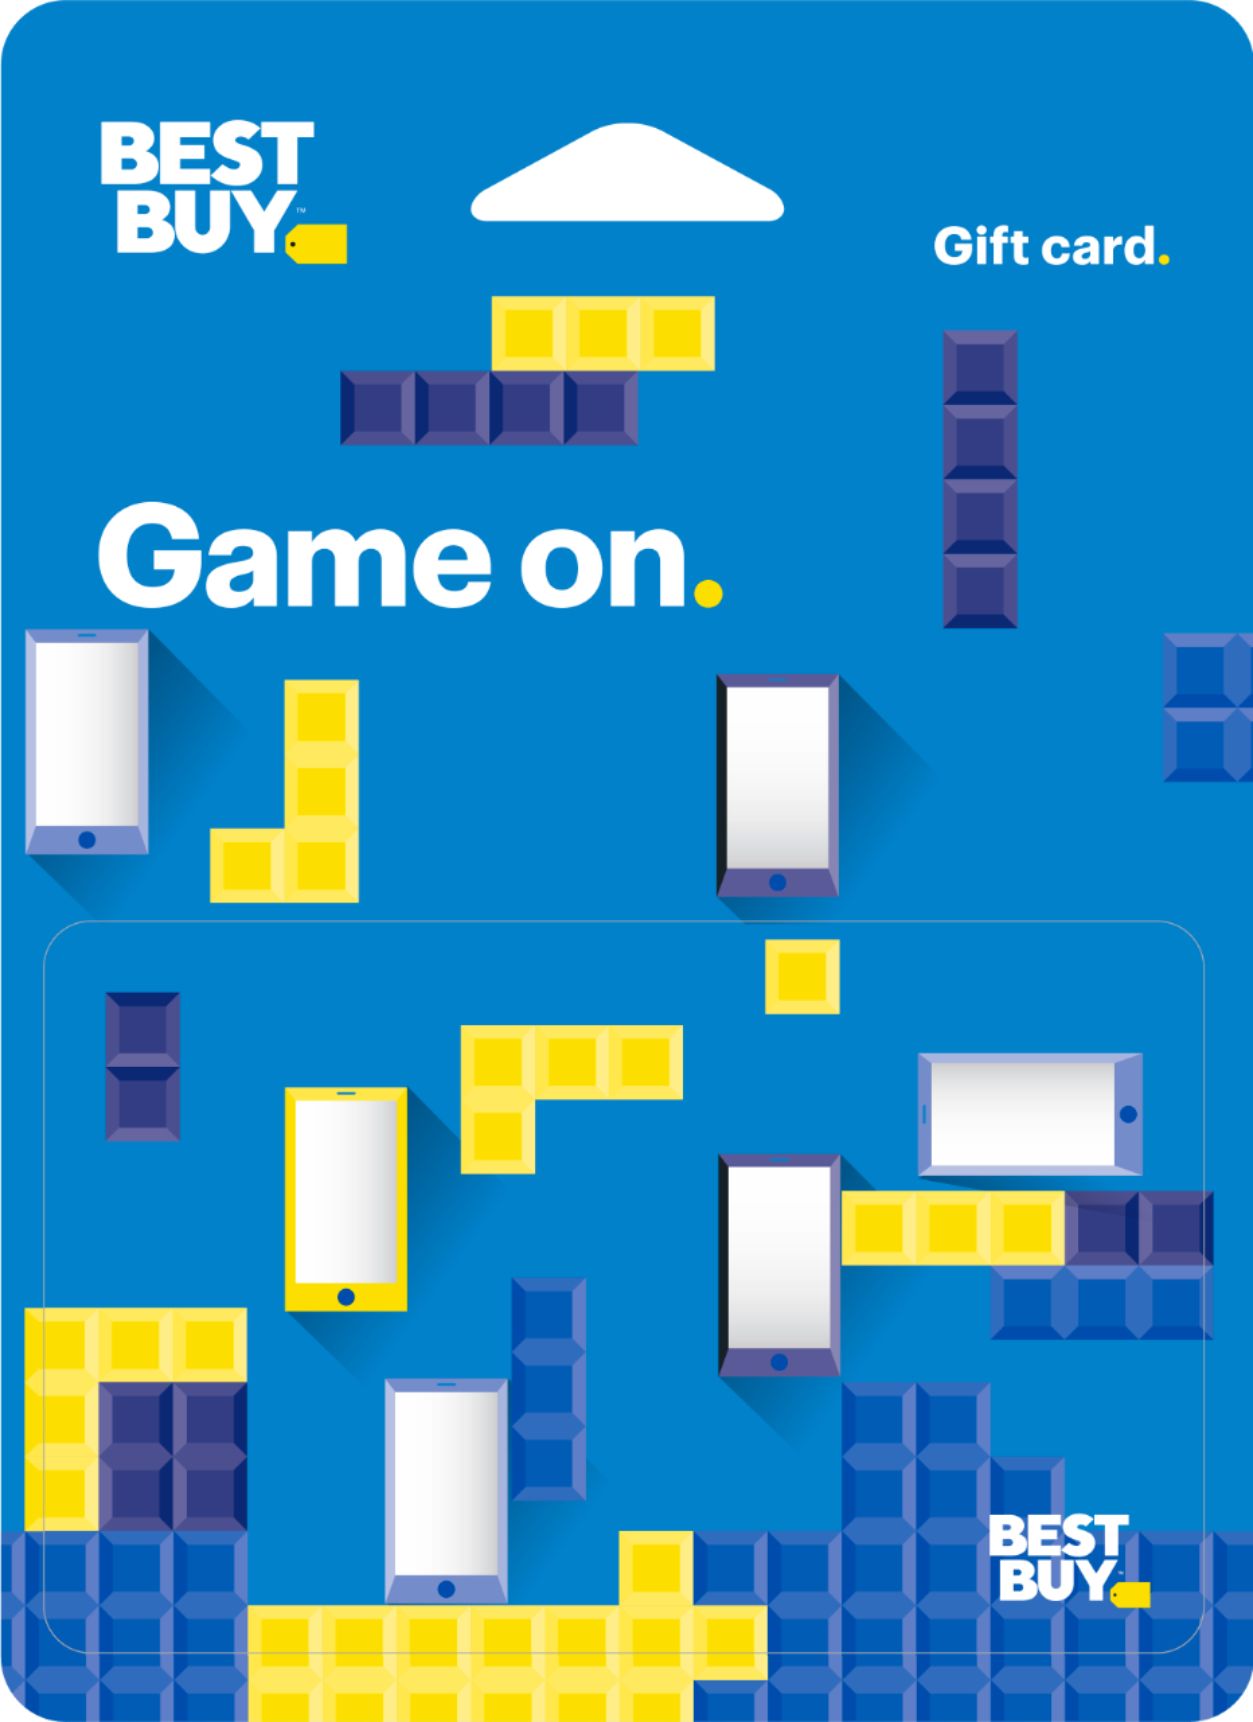 All Other Gaming Gift Cards in Gaming Gift Cards 